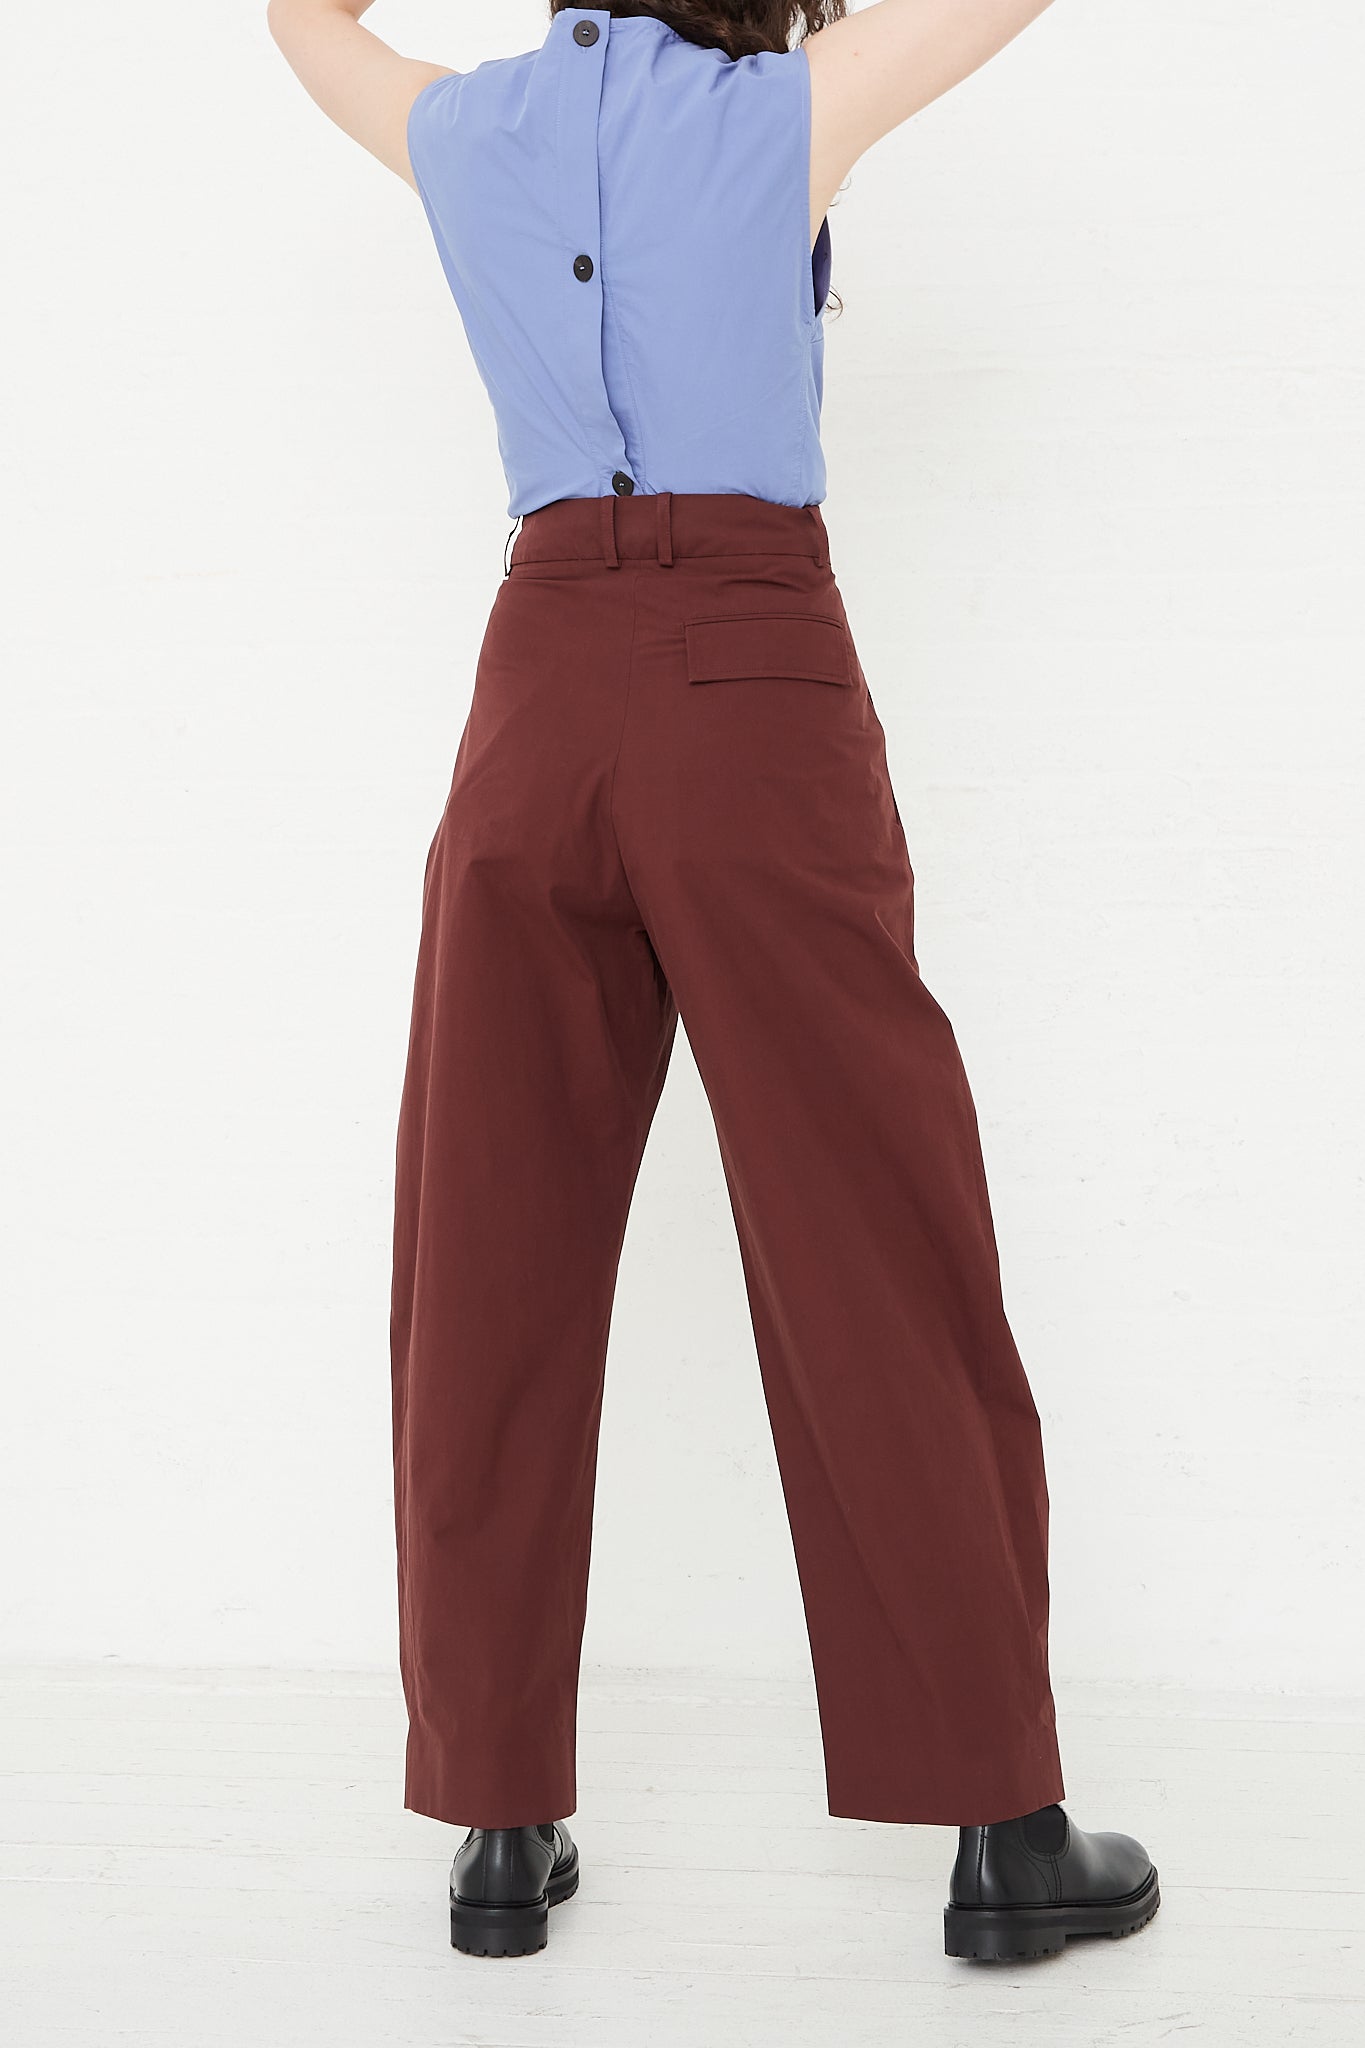 Studio Nicholson Acuna Pant in Compote back view